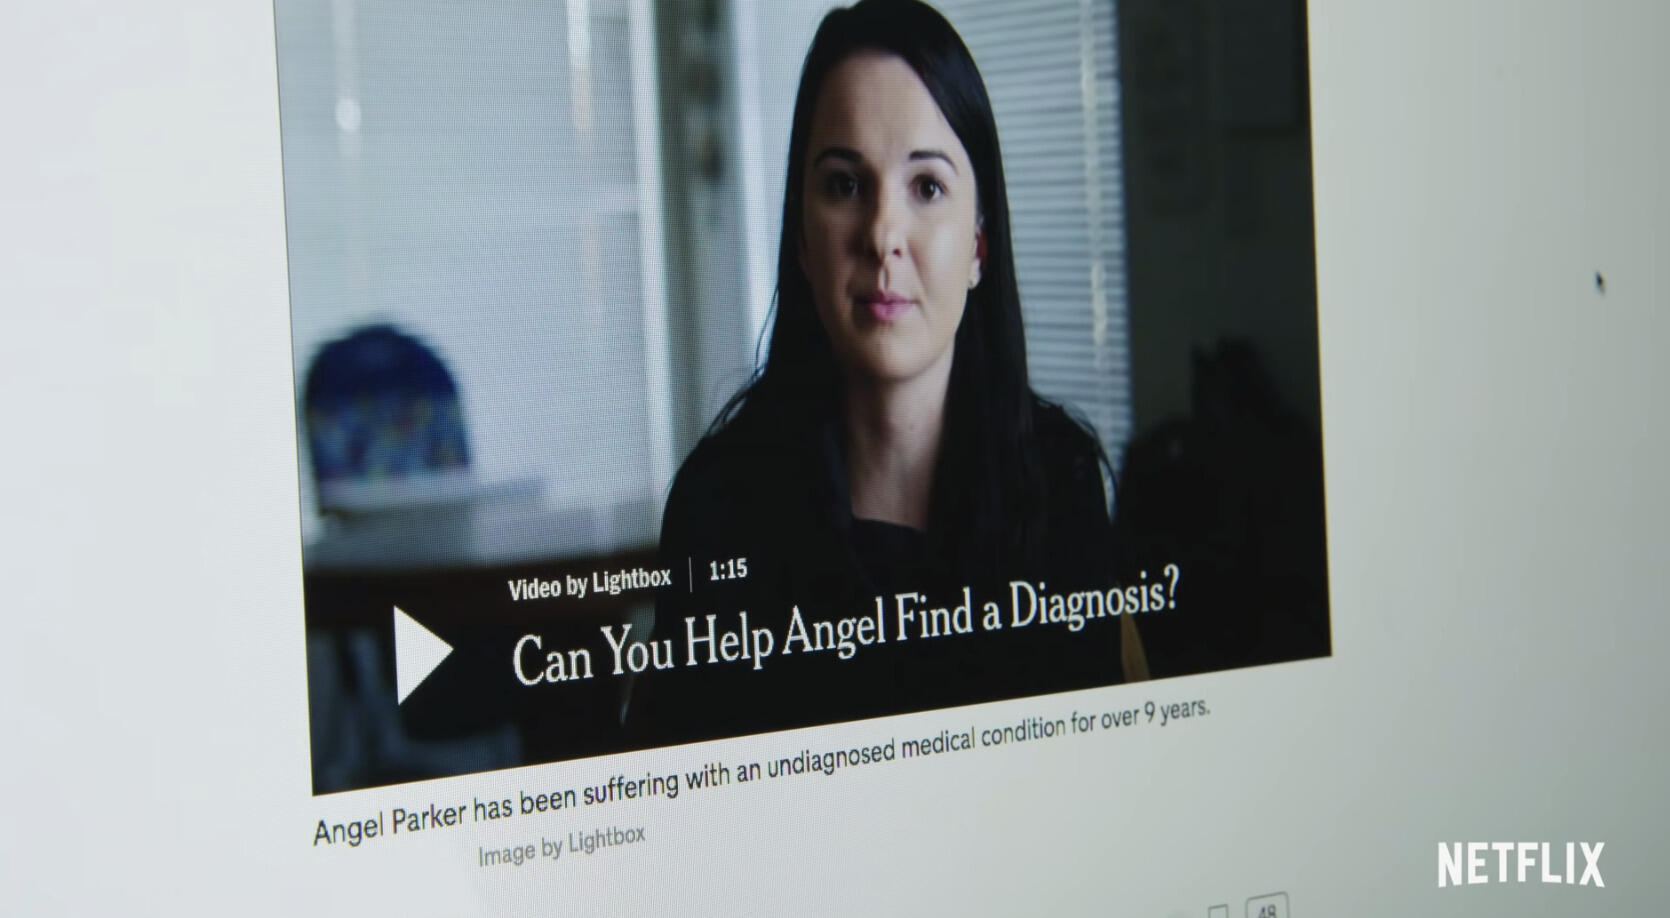 Fung was taking a break from studying when she came across a column in The New York Times Magazine called “Diagnosis” that described hard-to-solve medical mysteries.